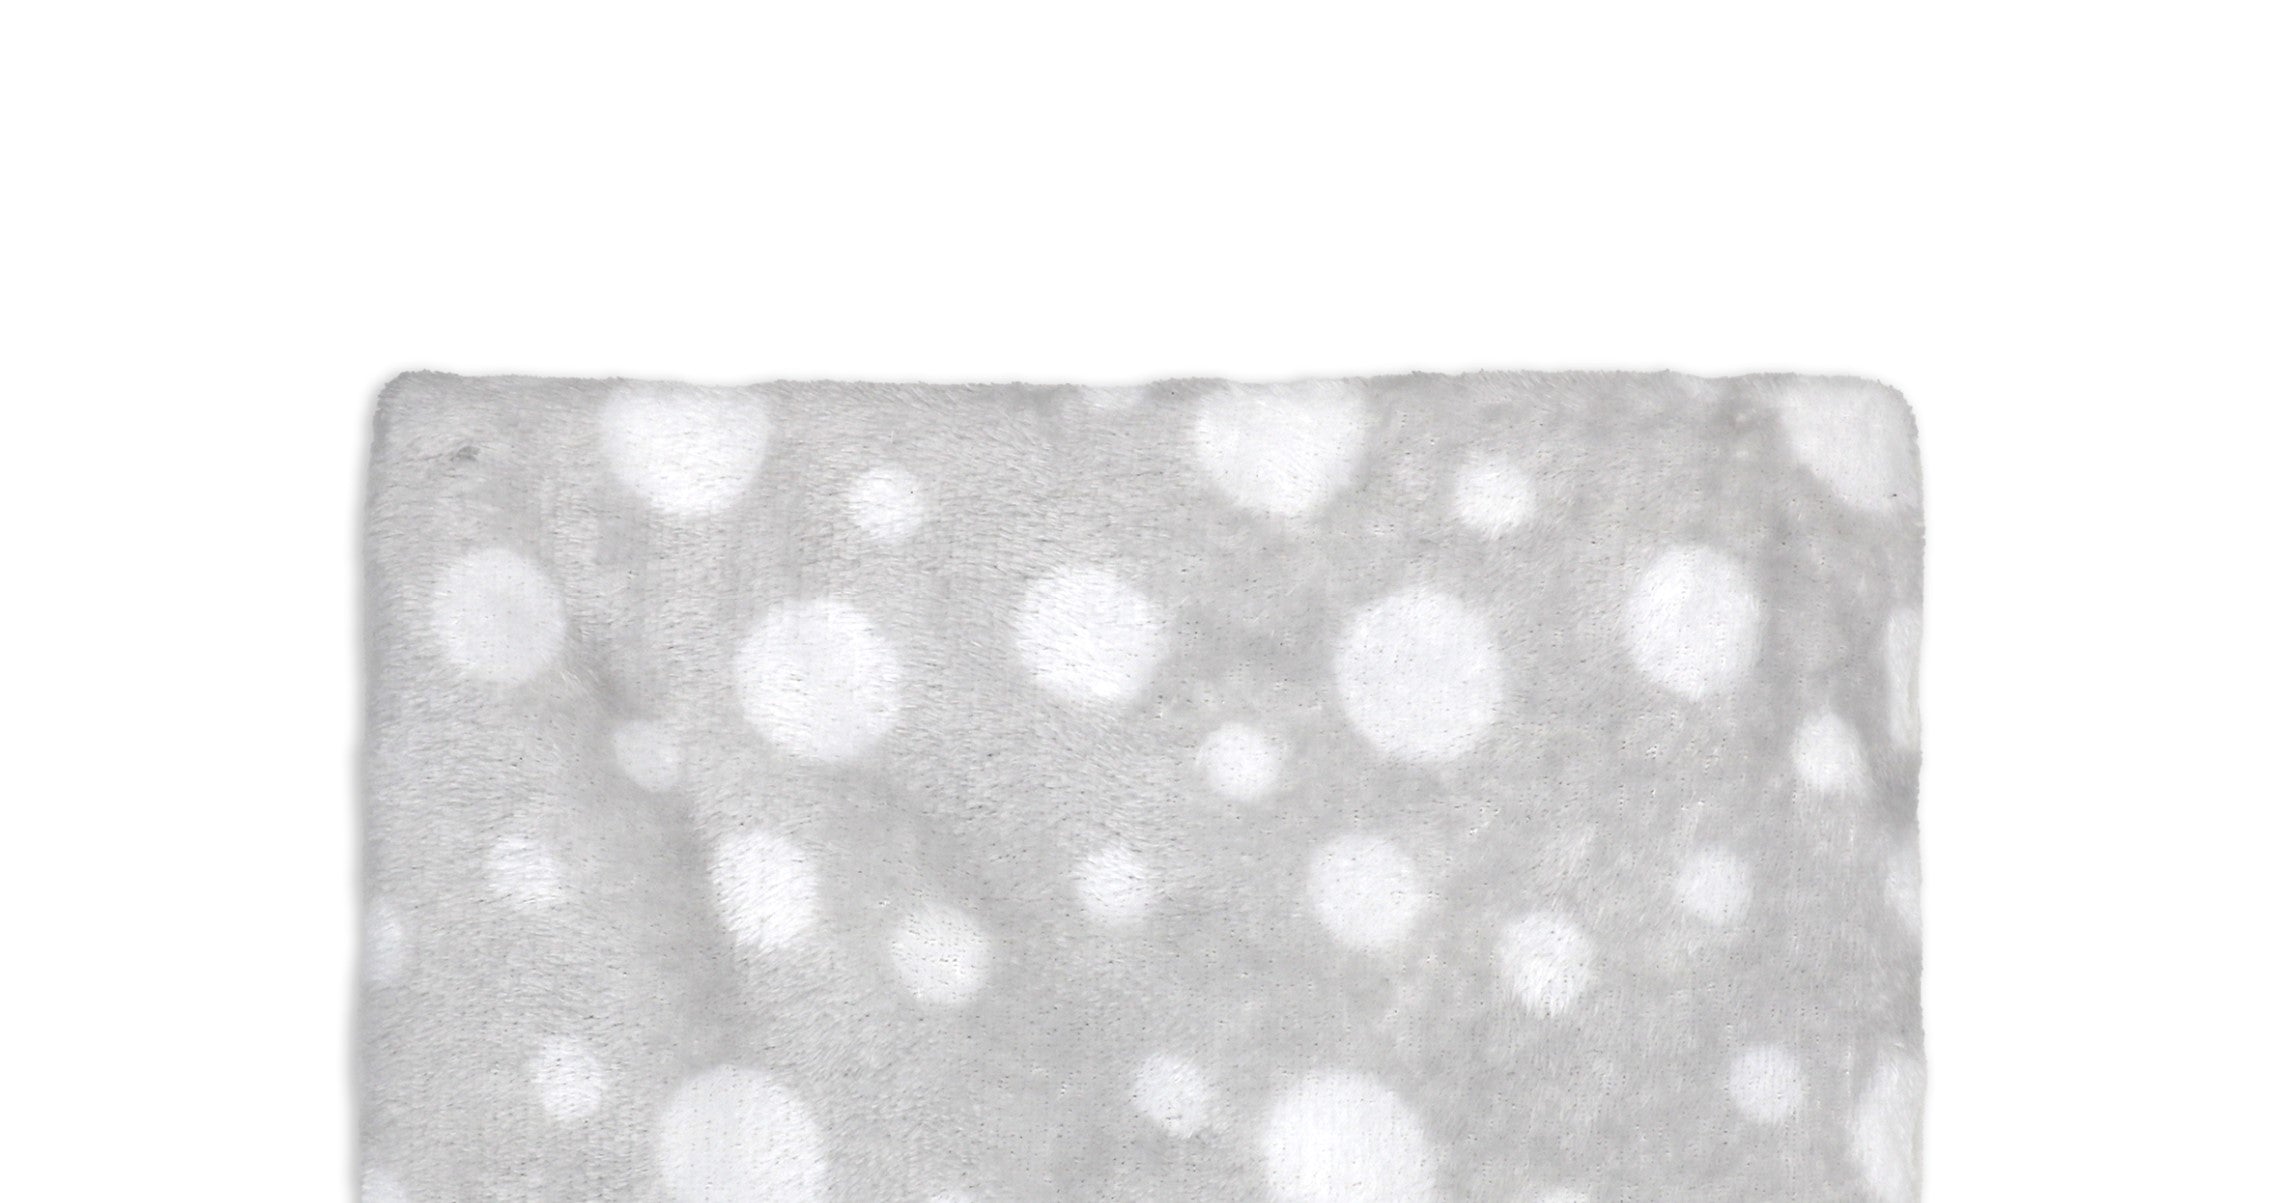 Dotted Flannel Fleece Baby Blanket, 30 x 36 in, Light Grey & White Color